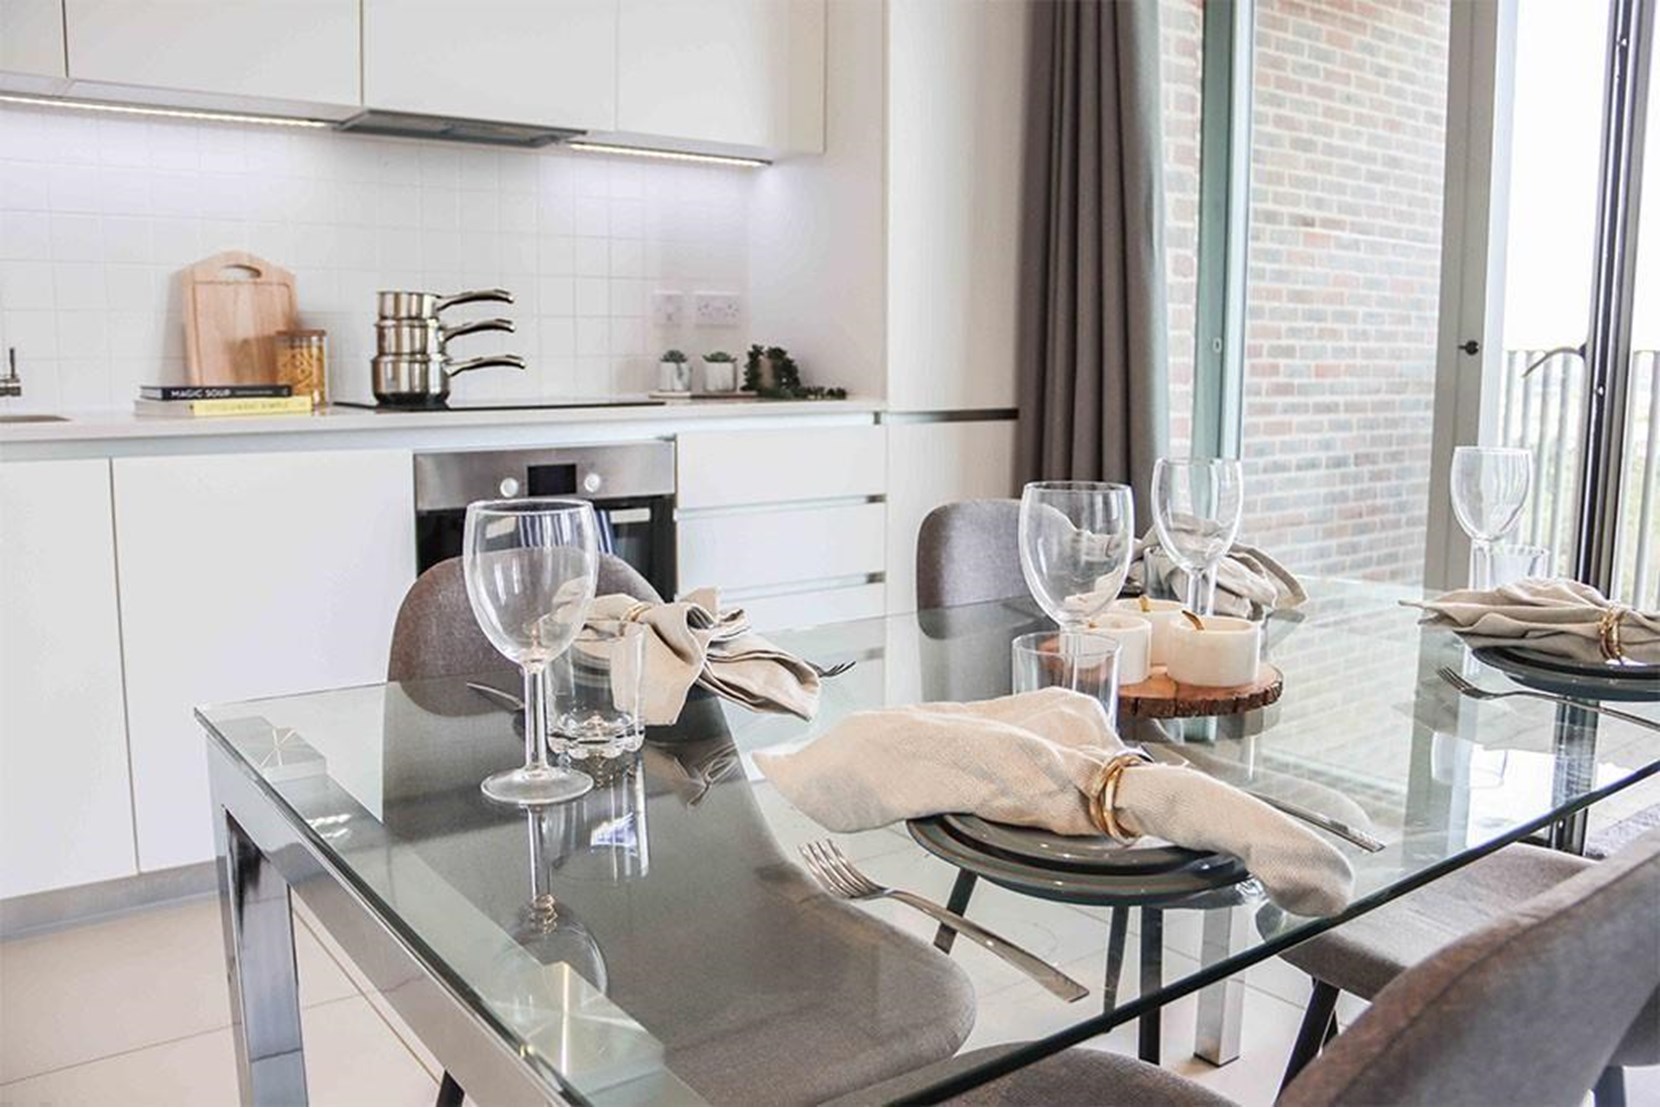 Apartments to Rent by Savills at Rehearsal Rooms, Ealing, W3, kitchen dining area